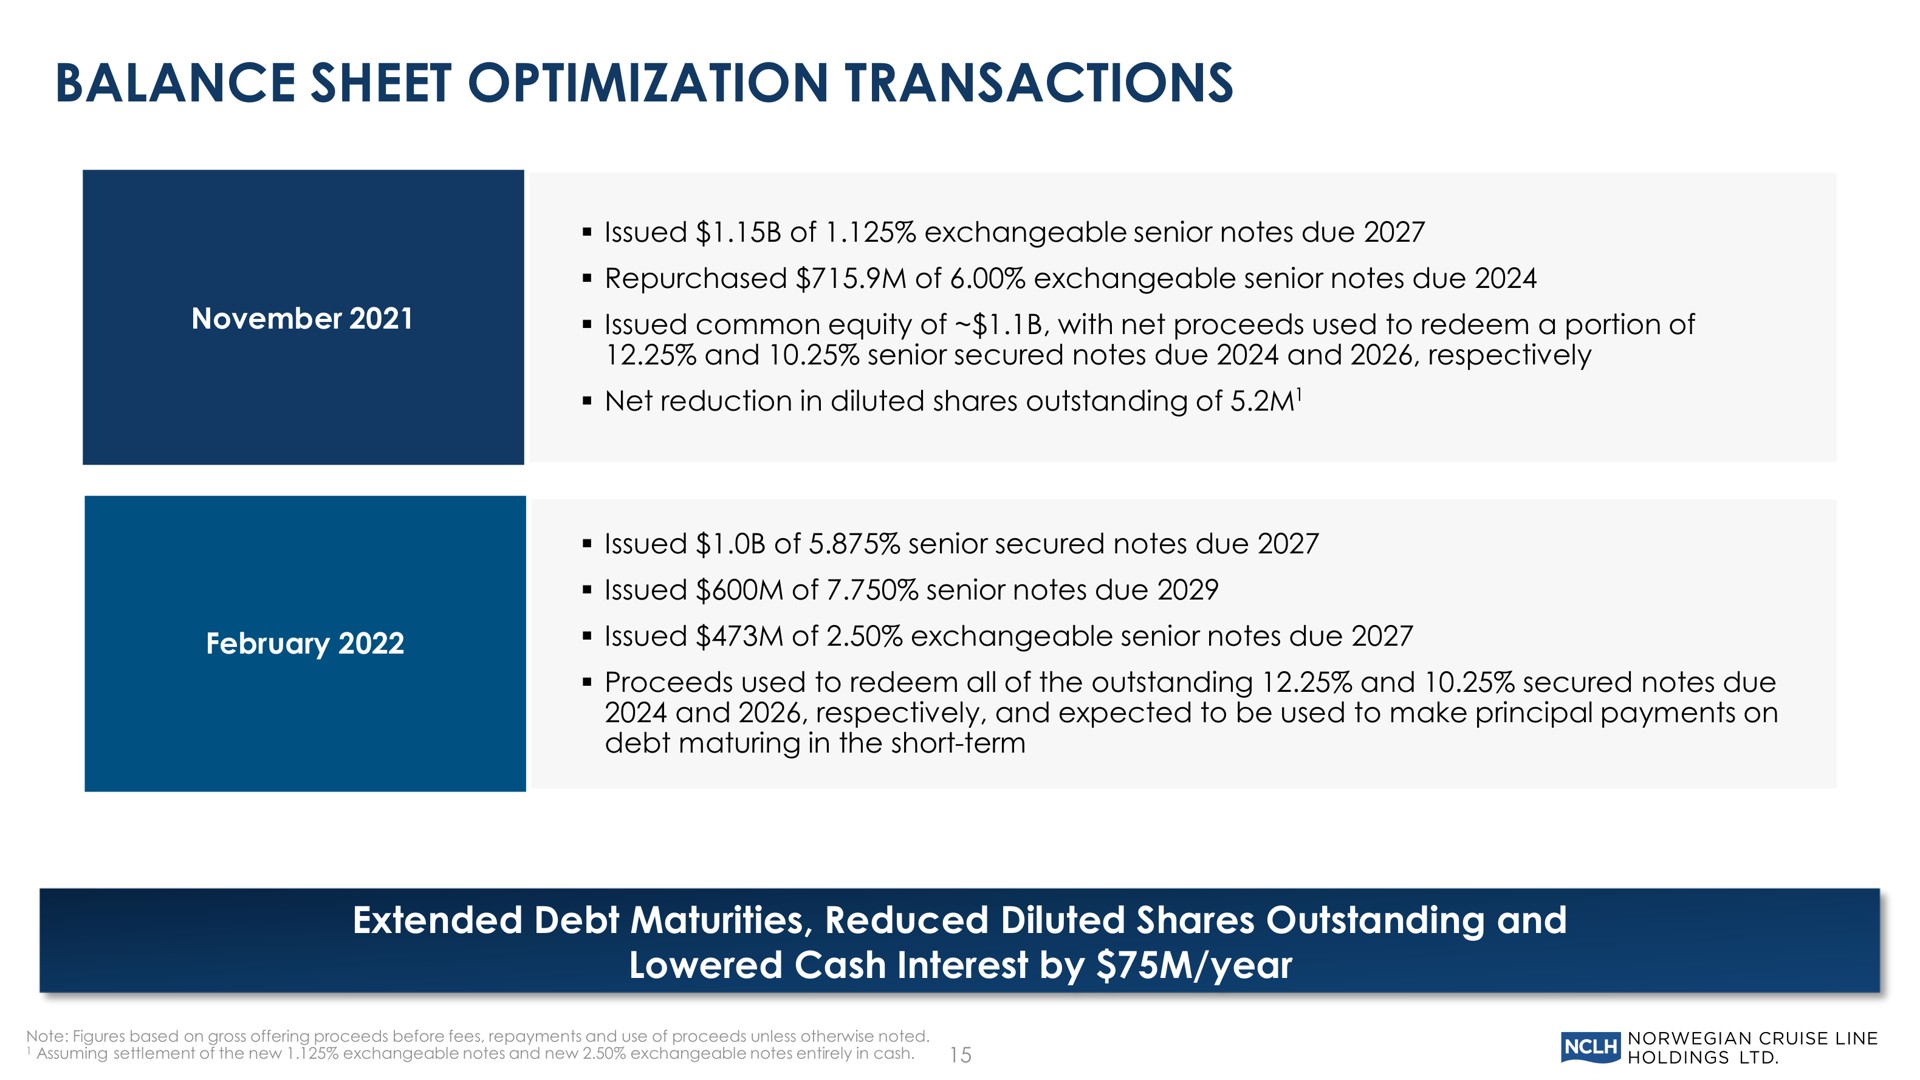 balance sheet optimization transactions extended debt maturities reduced diluted shares outstanding and lowered cash interest by year | Norwegian Cruise Line